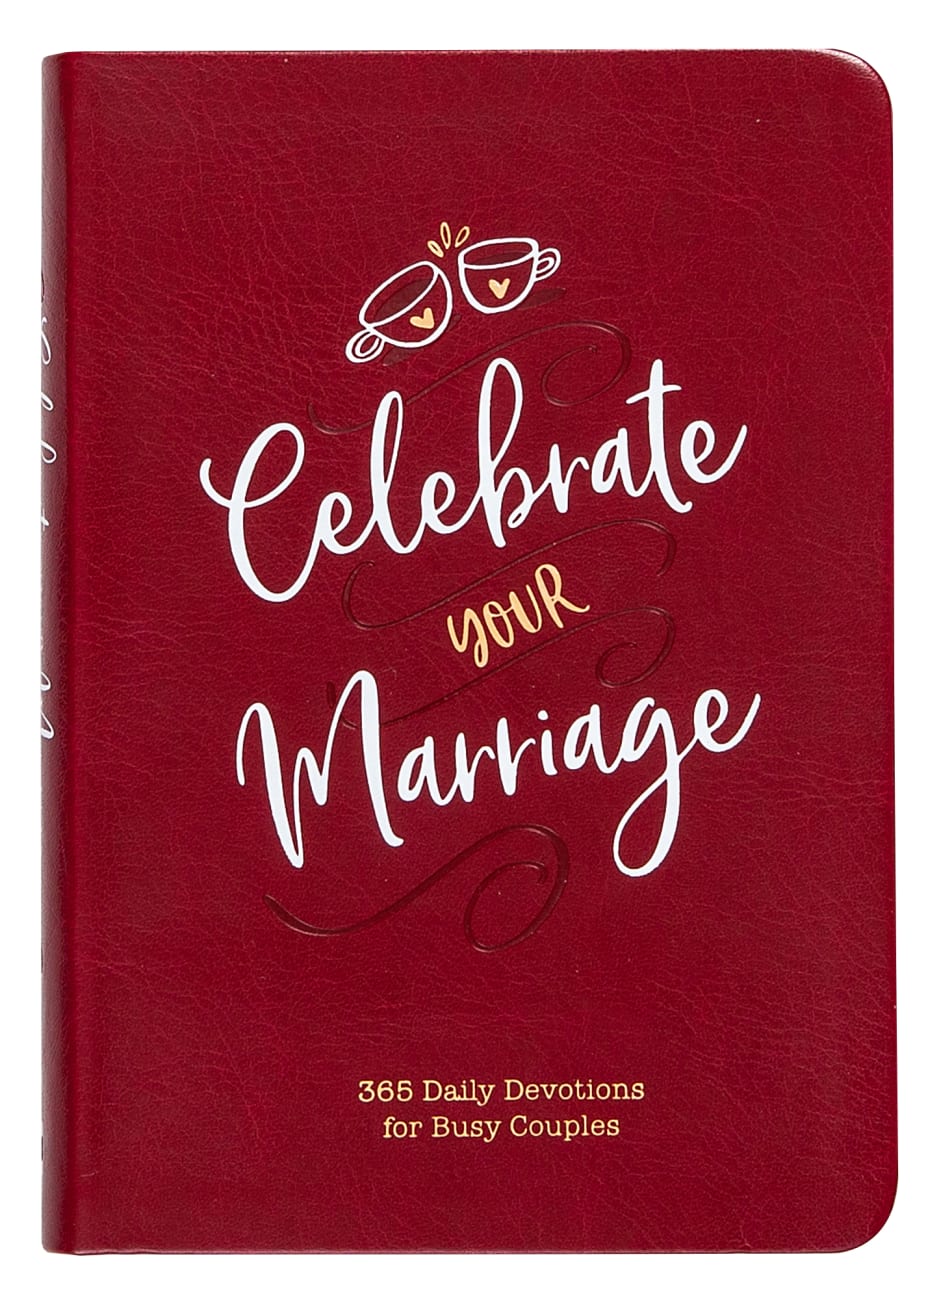 Celebrate Your Marriage: 365 Daily Devotions For Busy Couples Imitation Leather